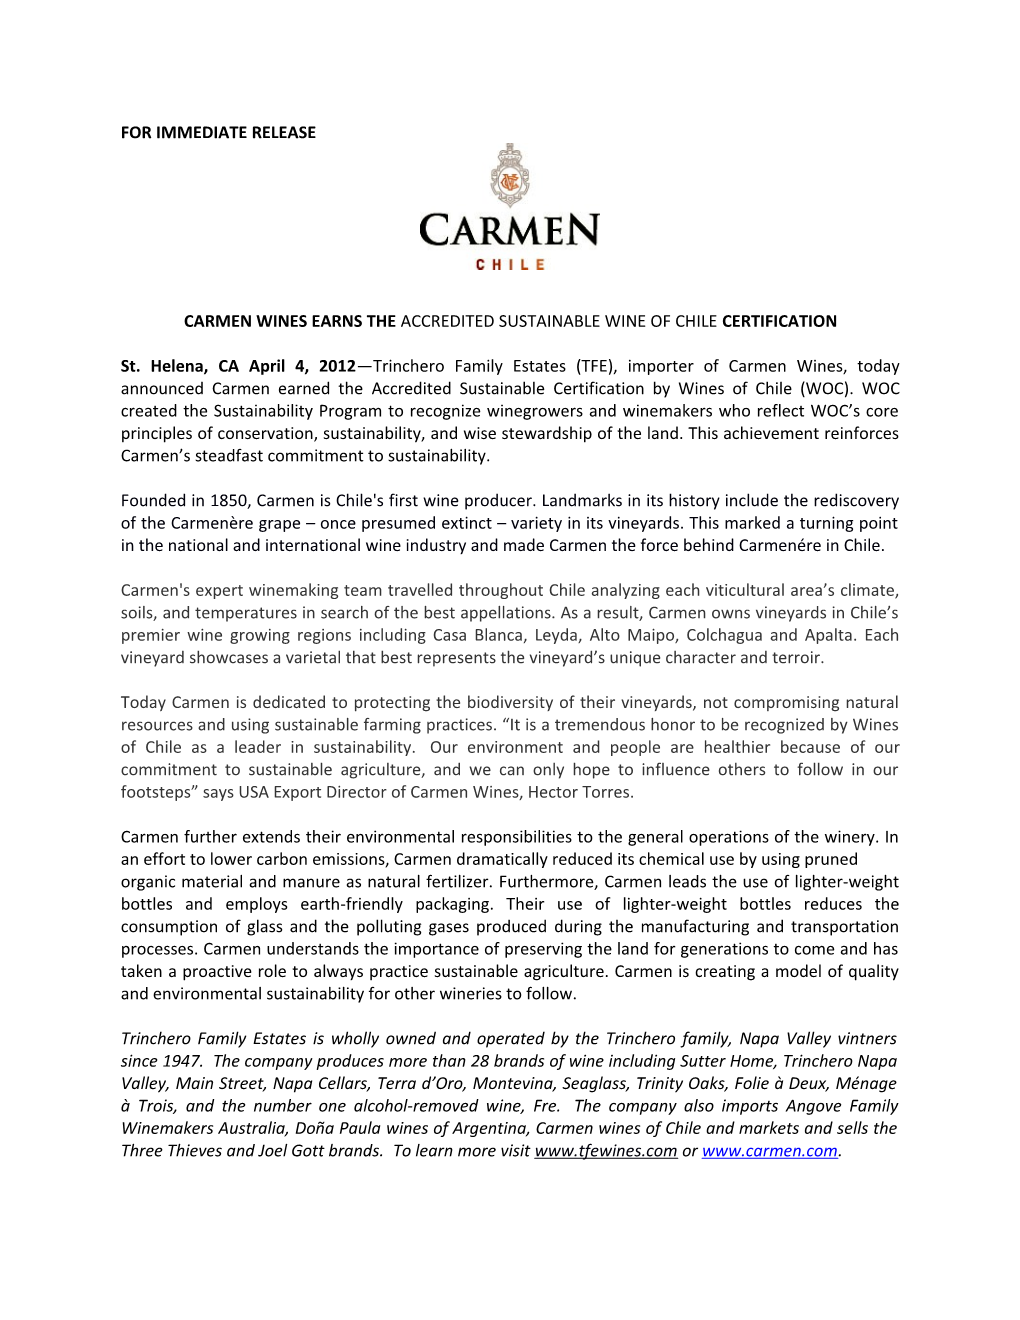 Carmen Wines Earns Theaccredited Sustainable Wine of Chile Certification